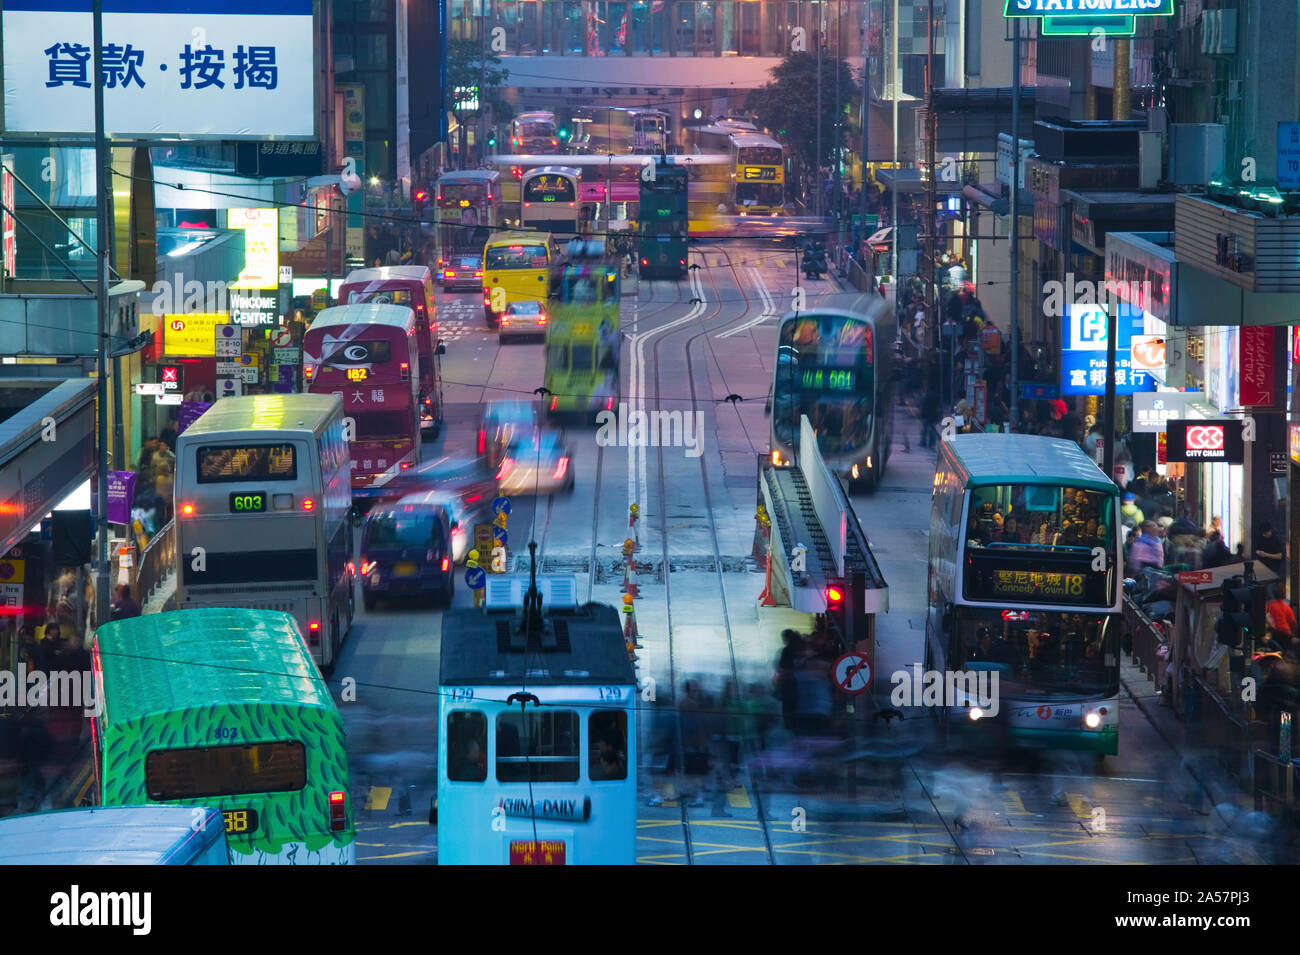 Traffic on a street at night, Des Voeux Road Central, Central District, Hong Kong Island, Hong Kong Stock Photo